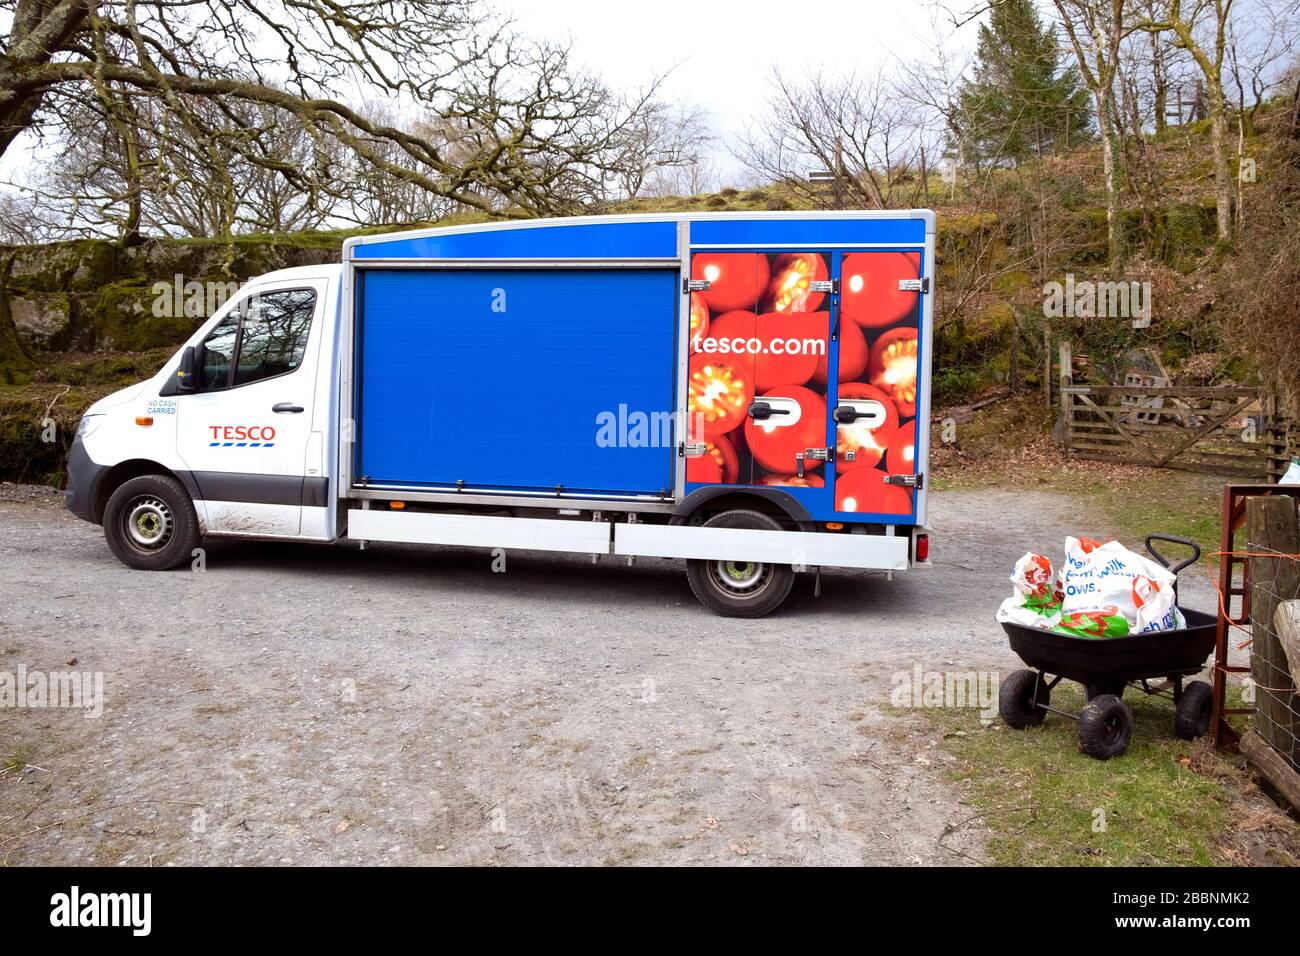 Tesco supermarket van delivering groceries to a customer home in rural Wales during the Coronavirus outbreak Covid-19 pandemic Wales UK  spring  2020 Stock Photo